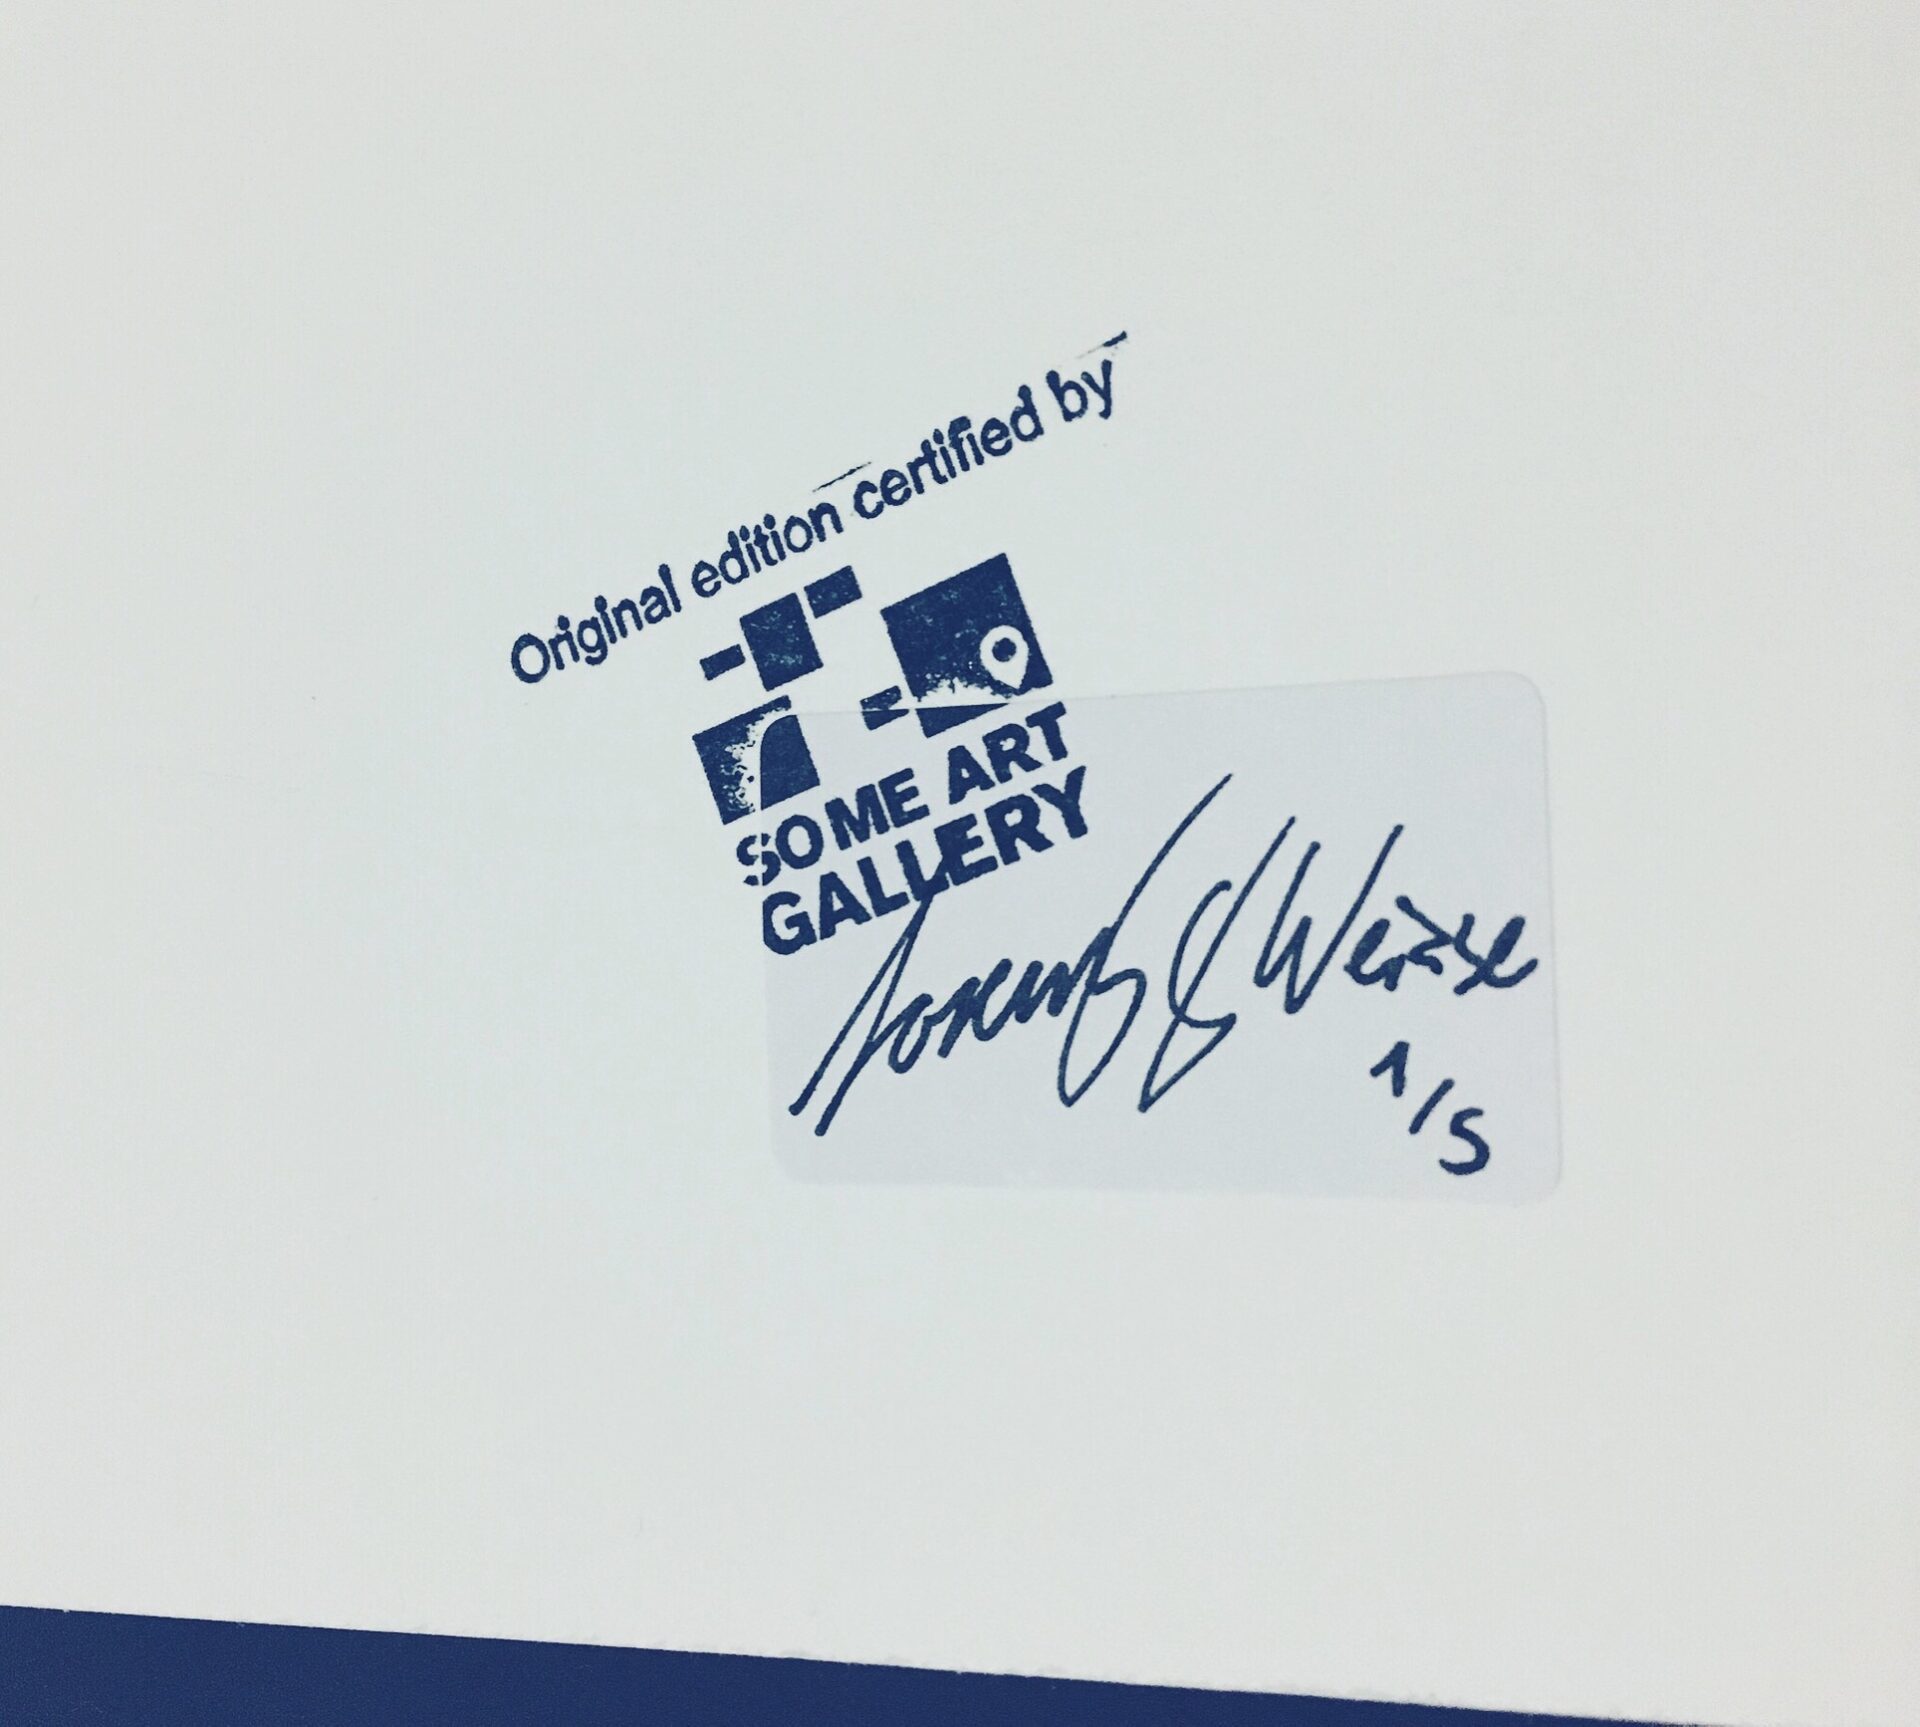 limited artwork signed by artist lorenz weisse and certified by social media art gallery